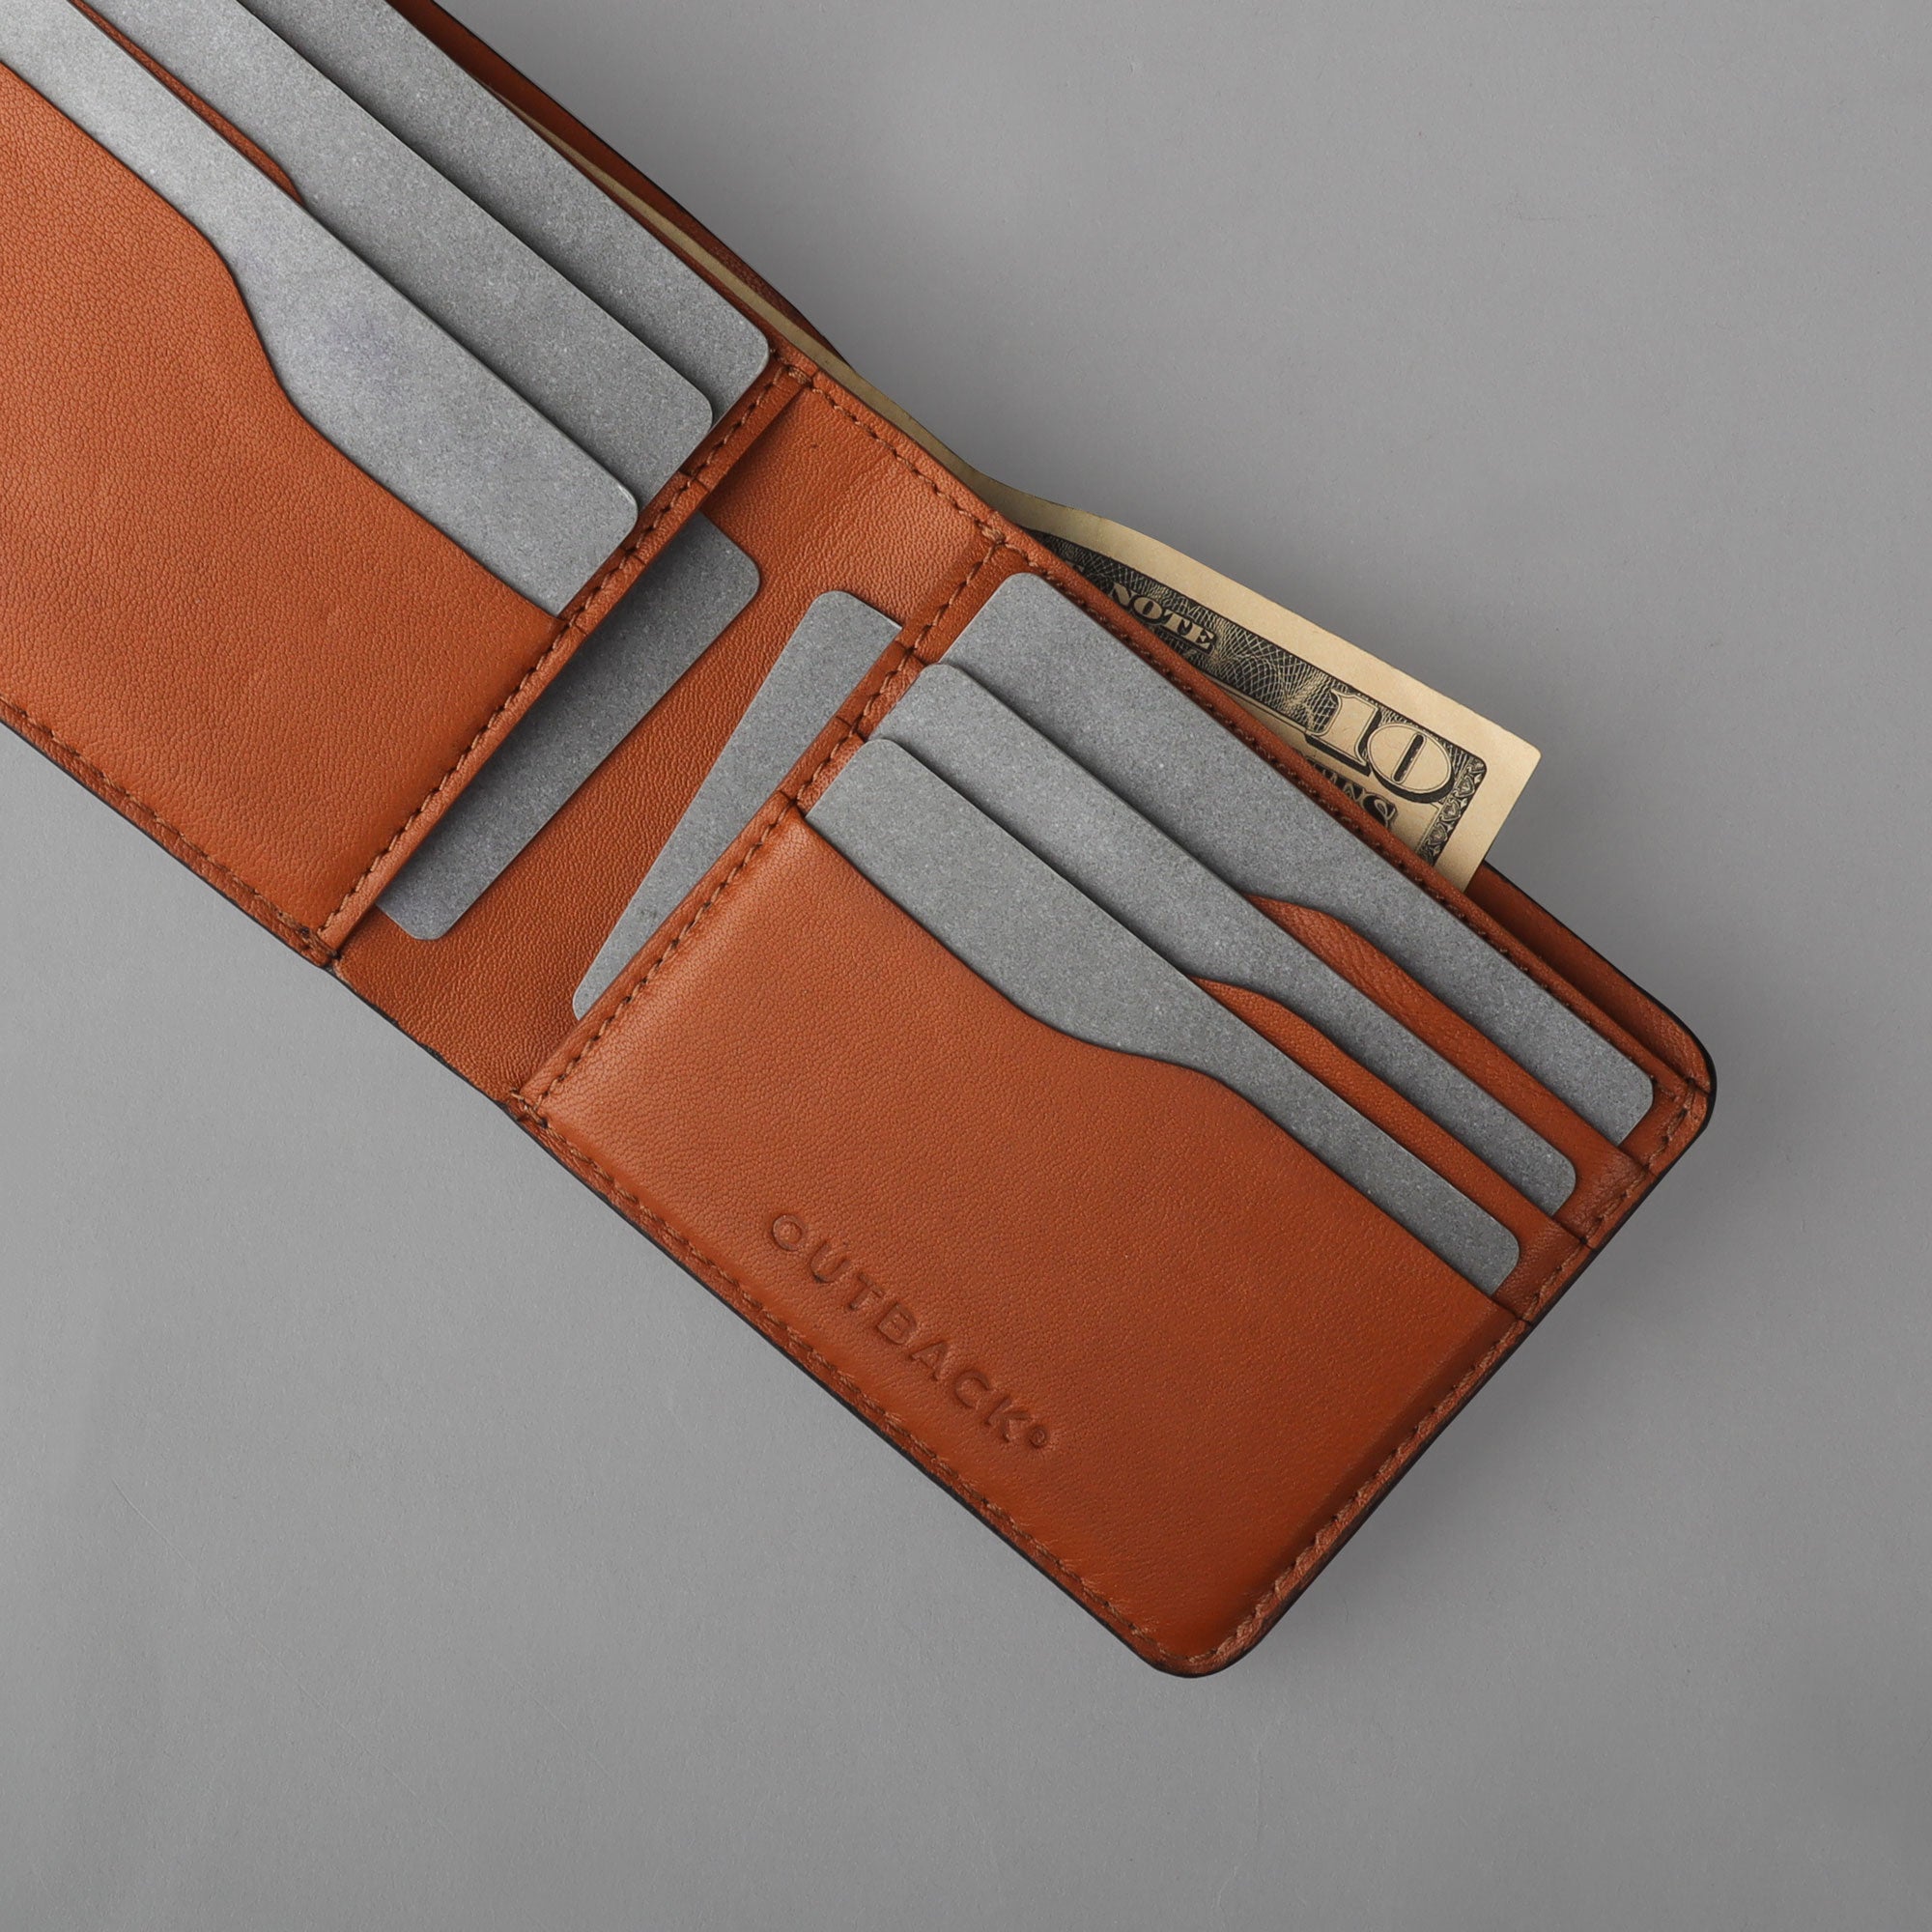 Bi-fold leather wallet with your name on it